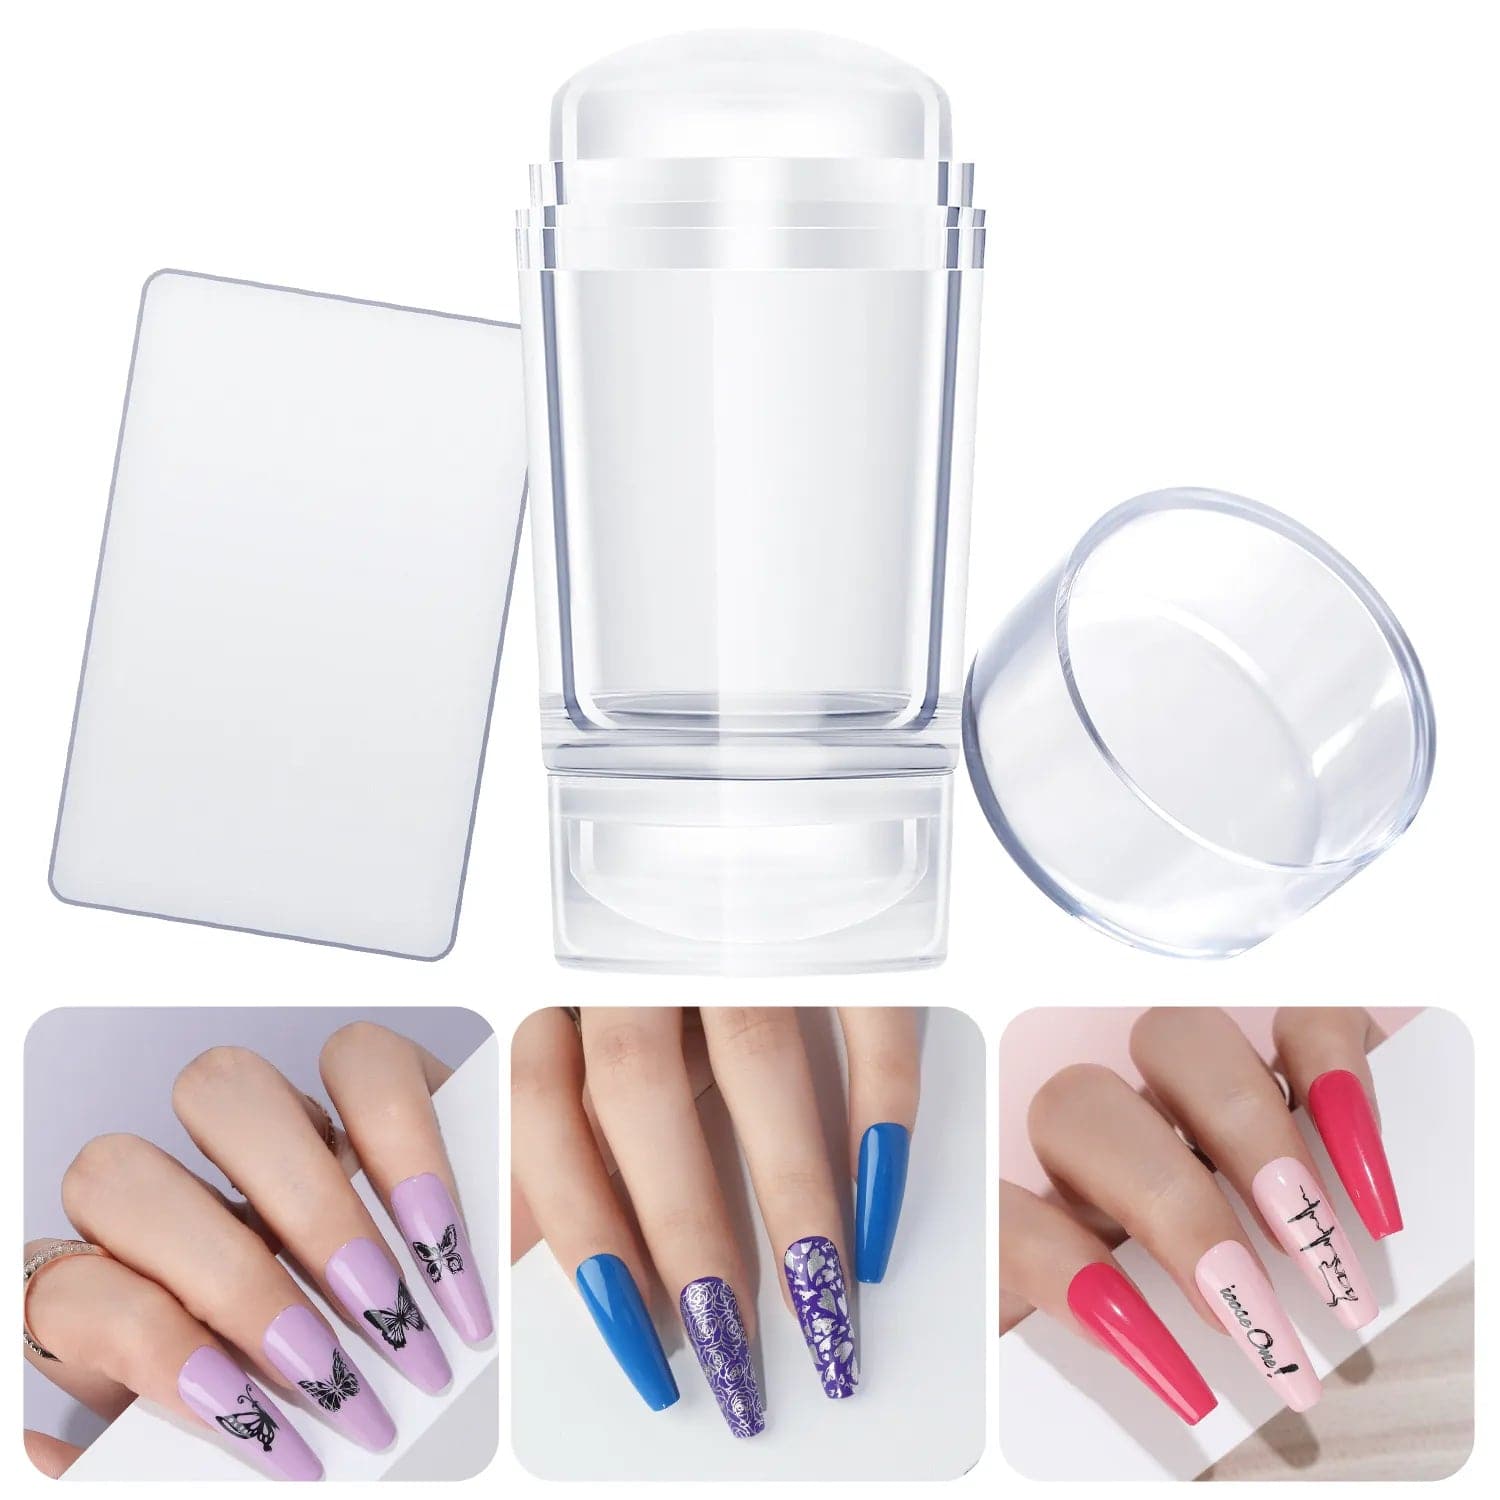 Nail Stamper Kit: Create Unique Nail Art with Flower and Leaf Designs